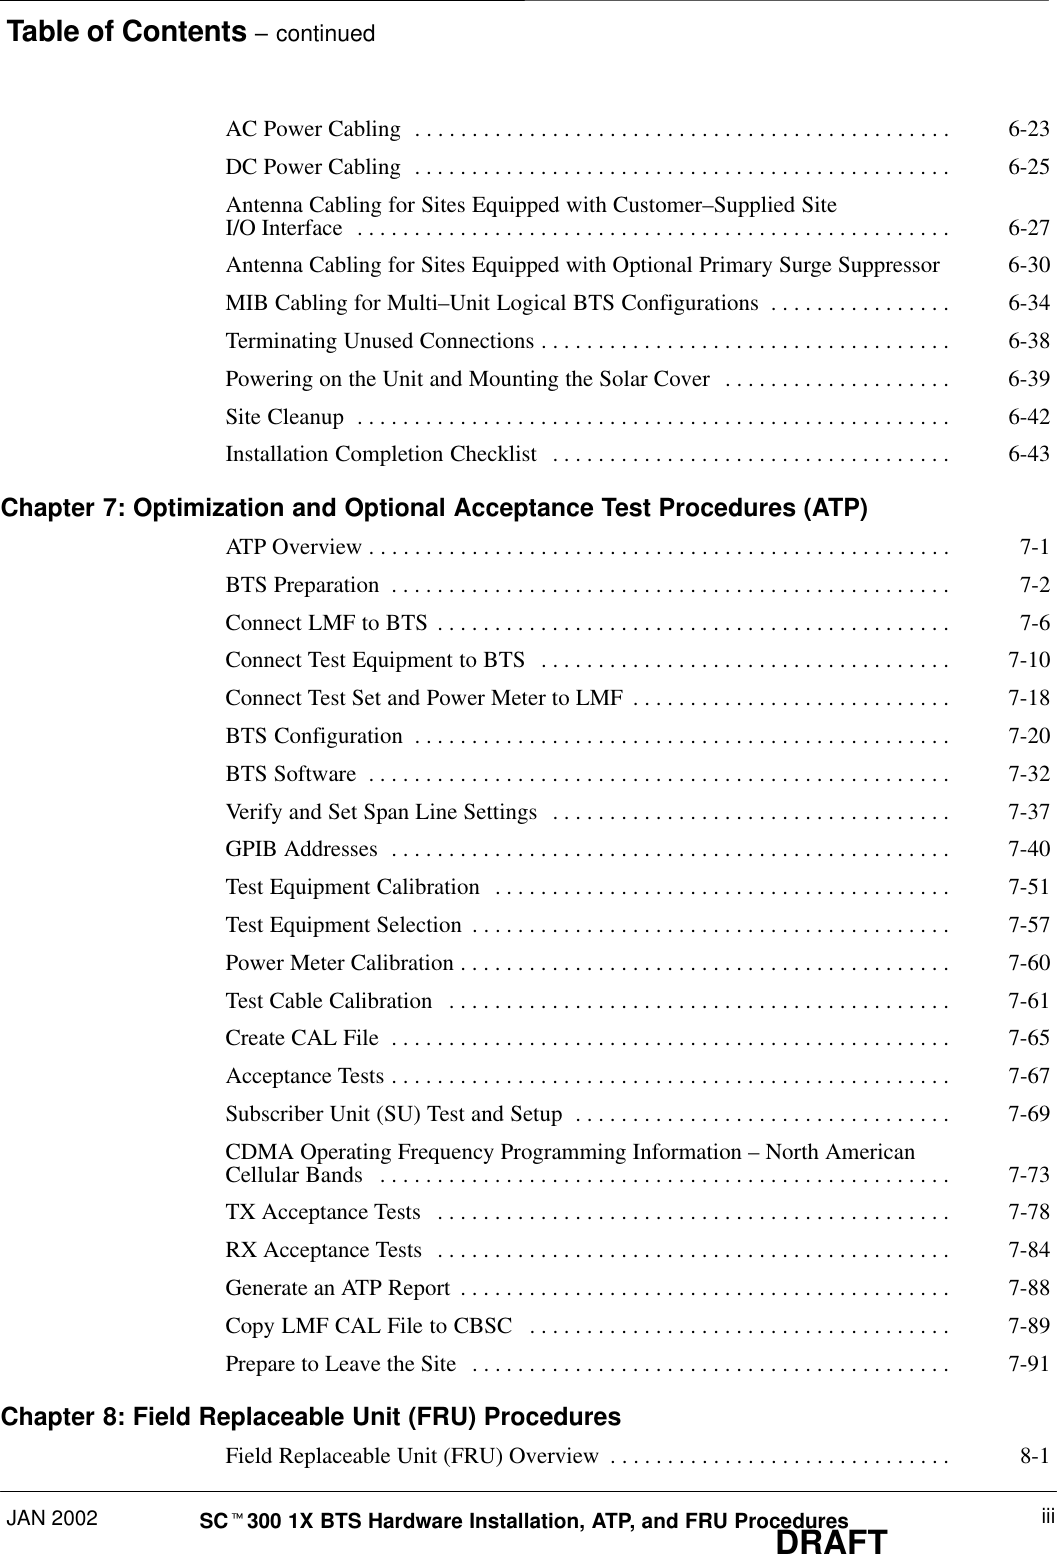 Table of Contents – continuedJAN 2002 iiiSCt300 1X BTS Hardware Installation, ATP, and FRU ProceduresDRAFTAC Power Cabling 6-23. . . . . . . . . . . . . . . . . . . . . . . . . . . . . . . . . . . . . . . . . . . . . . . DC Power Cabling 6-25. . . . . . . . . . . . . . . . . . . . . . . . . . . . . . . . . . . . . . . . . . . . . . . Antenna Cabling for Sites Equipped with Customer–Supplied Site I/O Interface 6-27. . . . . . . . . . . . . . . . . . . . . . . . . . . . . . . . . . . . . . . . . . . . . . . . . . . . Antenna Cabling for Sites Equipped with Optional Primary Surge Suppressor 6-30MIB Cabling for Multi–Unit Logical BTS Configurations 6-34. . . . . . . . . . . . . . . . Terminating Unused Connections 6-38. . . . . . . . . . . . . . . . . . . . . . . . . . . . . . . . . . . . Powering on the Unit and Mounting the Solar Cover 6-39. . . . . . . . . . . . . . . . . . . . Site Cleanup 6-42. . . . . . . . . . . . . . . . . . . . . . . . . . . . . . . . . . . . . . . . . . . . . . . . . . . . Installation Completion Checklist 6-43. . . . . . . . . . . . . . . . . . . . . . . . . . . . . . . . . . . Chapter 7: Optimization and Optional Acceptance Test Procedures (ATP)ATP Overview 7-1. . . . . . . . . . . . . . . . . . . . . . . . . . . . . . . . . . . . . . . . . . . . . . . . . . . BTS Preparation 7-2. . . . . . . . . . . . . . . . . . . . . . . . . . . . . . . . . . . . . . . . . . . . . . . . . Connect LMF to BTS 7-6. . . . . . . . . . . . . . . . . . . . . . . . . . . . . . . . . . . . . . . . . . . . . Connect Test Equipment to BTS 7-10. . . . . . . . . . . . . . . . . . . . . . . . . . . . . . . . . . . . Connect Test Set and Power Meter to LMF 7-18. . . . . . . . . . . . . . . . . . . . . . . . . . . . BTS Configuration 7-20. . . . . . . . . . . . . . . . . . . . . . . . . . . . . . . . . . . . . . . . . . . . . . . BTS Software 7-32. . . . . . . . . . . . . . . . . . . . . . . . . . . . . . . . . . . . . . . . . . . . . . . . . . . Verify and Set Span Line Settings 7-37. . . . . . . . . . . . . . . . . . . . . . . . . . . . . . . . . . . GPIB Addresses 7-40. . . . . . . . . . . . . . . . . . . . . . . . . . . . . . . . . . . . . . . . . . . . . . . . . Test Equipment Calibration 7-51. . . . . . . . . . . . . . . . . . . . . . . . . . . . . . . . . . . . . . . . Test Equipment Selection 7-57. . . . . . . . . . . . . . . . . . . . . . . . . . . . . . . . . . . . . . . . . . Power Meter Calibration 7-60. . . . . . . . . . . . . . . . . . . . . . . . . . . . . . . . . . . . . . . . . . . Test Cable Calibration 7-61. . . . . . . . . . . . . . . . . . . . . . . . . . . . . . . . . . . . . . . . . . . . Create CAL File 7-65. . . . . . . . . . . . . . . . . . . . . . . . . . . . . . . . . . . . . . . . . . . . . . . . . Acceptance Tests 7-67. . . . . . . . . . . . . . . . . . . . . . . . . . . . . . . . . . . . . . . . . . . . . . . . . Subscriber Unit (SU) Test and Setup 7-69. . . . . . . . . . . . . . . . . . . . . . . . . . . . . . . . . CDMA Operating Frequency Programming Information – North American Cellular Bands 7-73. . . . . . . . . . . . . . . . . . . . . . . . . . . . . . . . . . . . . . . . . . . . . . . . . . TX Acceptance Tests 7-78. . . . . . . . . . . . . . . . . . . . . . . . . . . . . . . . . . . . . . . . . . . . . RX Acceptance Tests 7-84. . . . . . . . . . . . . . . . . . . . . . . . . . . . . . . . . . . . . . . . . . . . . Generate an ATP Report 7-88. . . . . . . . . . . . . . . . . . . . . . . . . . . . . . . . . . . . . . . . . . . Copy LMF CAL File to CBSC 7-89. . . . . . . . . . . . . . . . . . . . . . . . . . . . . . . . . . . . . Prepare to Leave the Site 7-91. . . . . . . . . . . . . . . . . . . . . . . . . . . . . . . . . . . . . . . . . . Chapter 8: Field Replaceable Unit (FRU) ProceduresField Replaceable Unit (FRU) Overview 8-1. . . . . . . . . . . . . . . . . . . . . . . . . . . . . . 